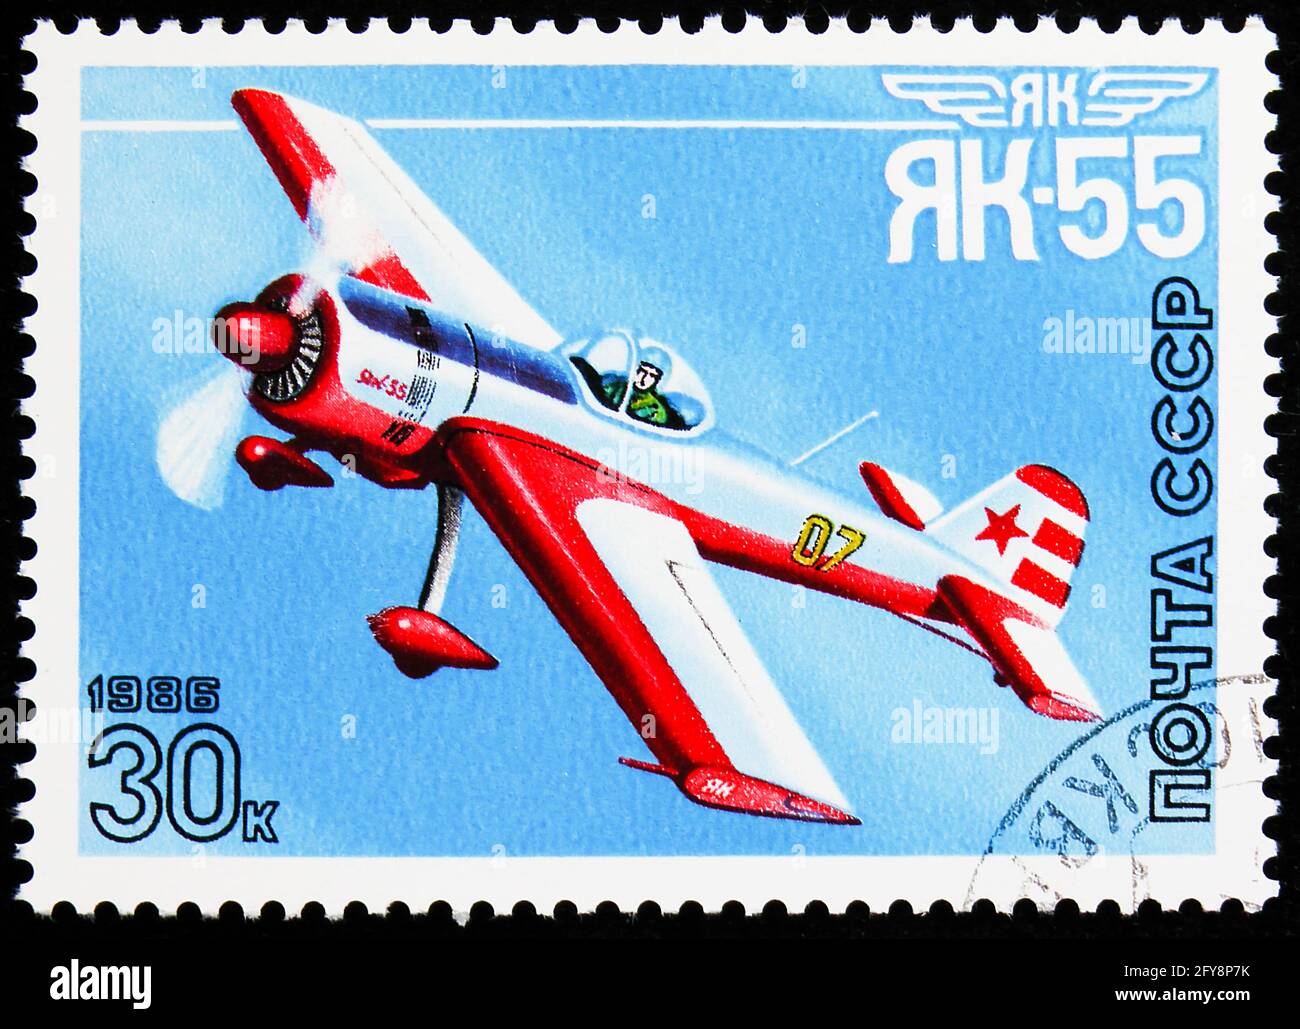 MOSCOW, RUSSIA - AUGUST 22, 2019: Postage stamp printed in Soviet Union (Russia) shows Aircraft Yak-55 (1981), Sports Aircraft Designed by Yakovlev se Stock Photo